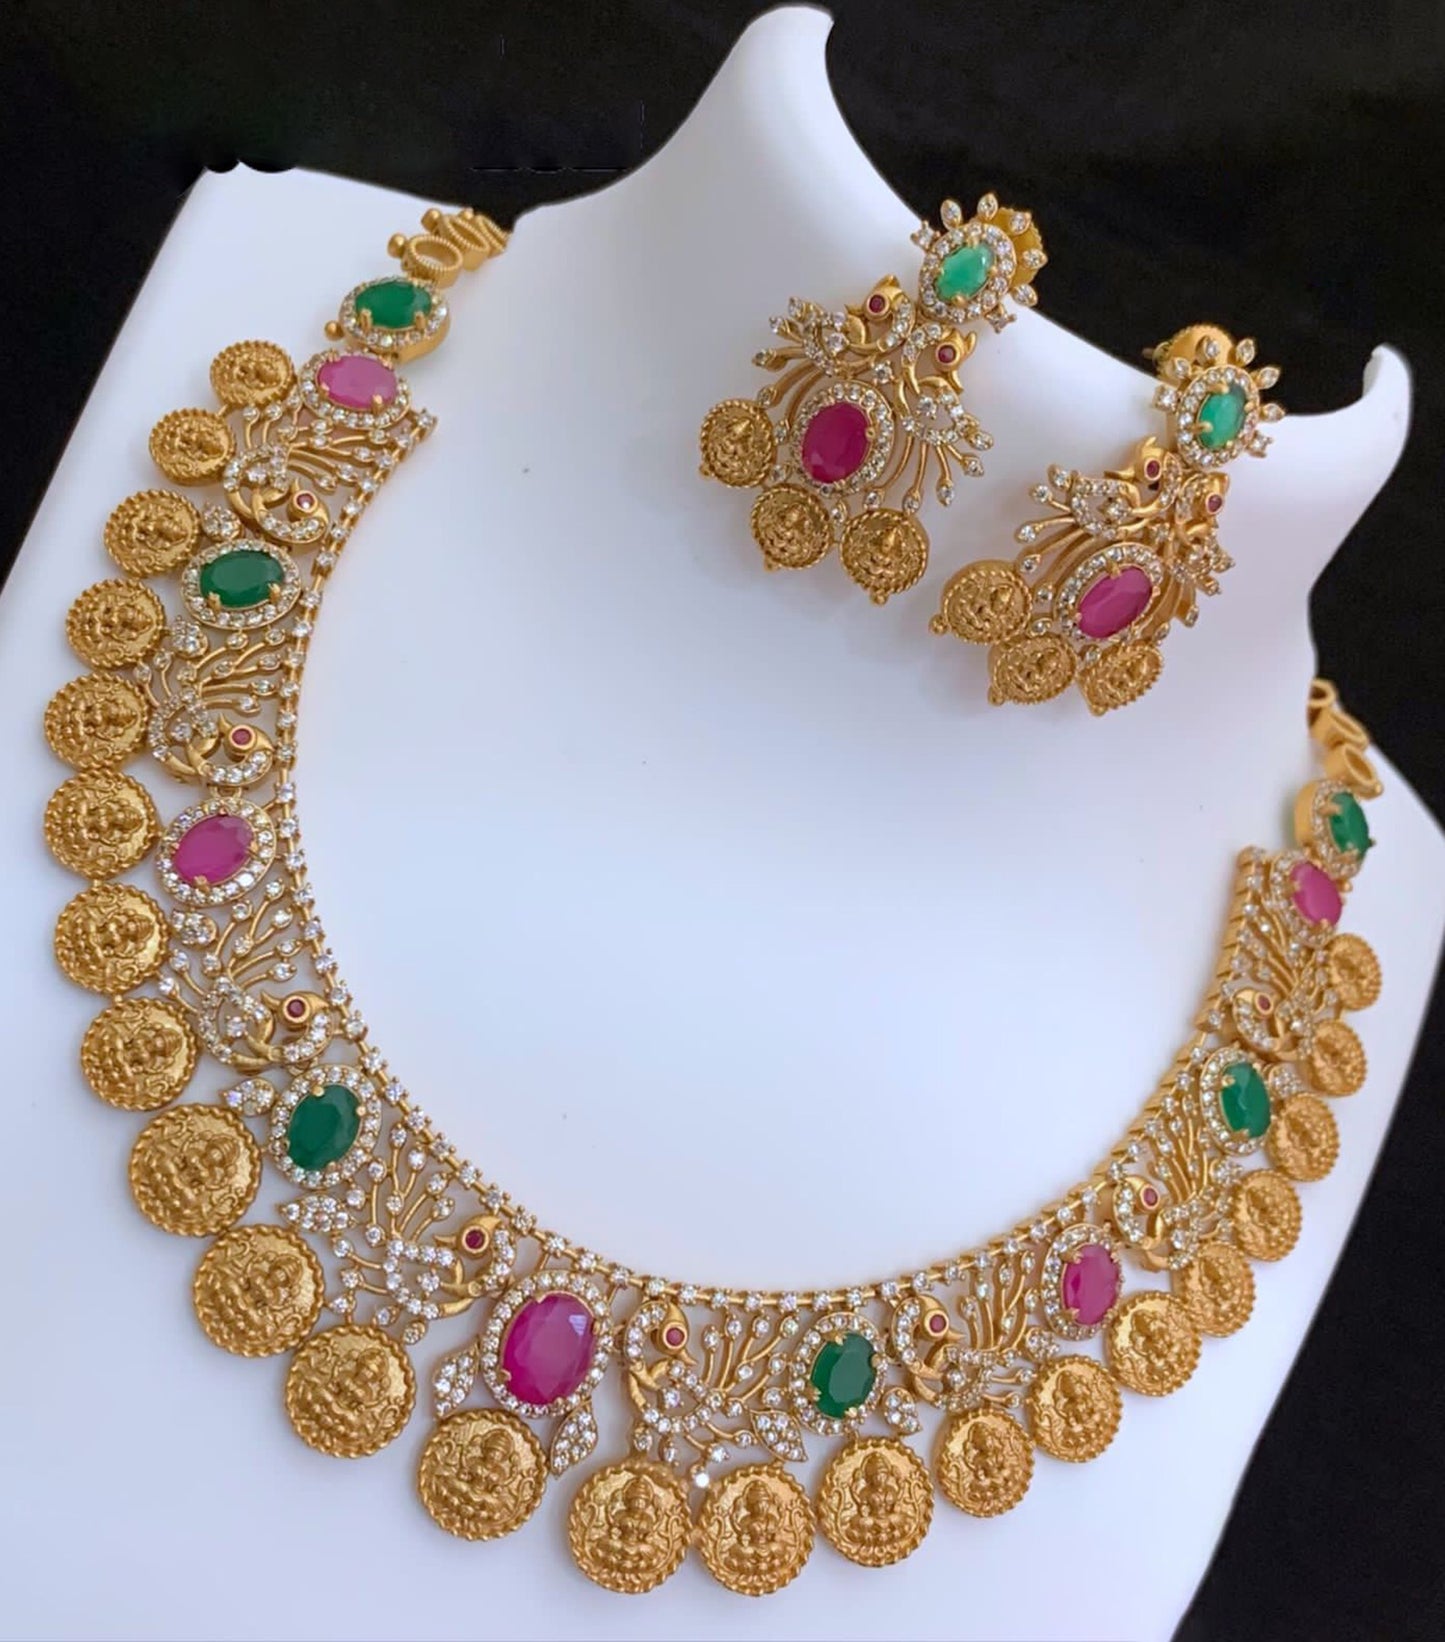 Matte Gold Lakshmi Coin & Peacock design Choker Necklace with Intermittent Oval Ruby-Emerald Stones